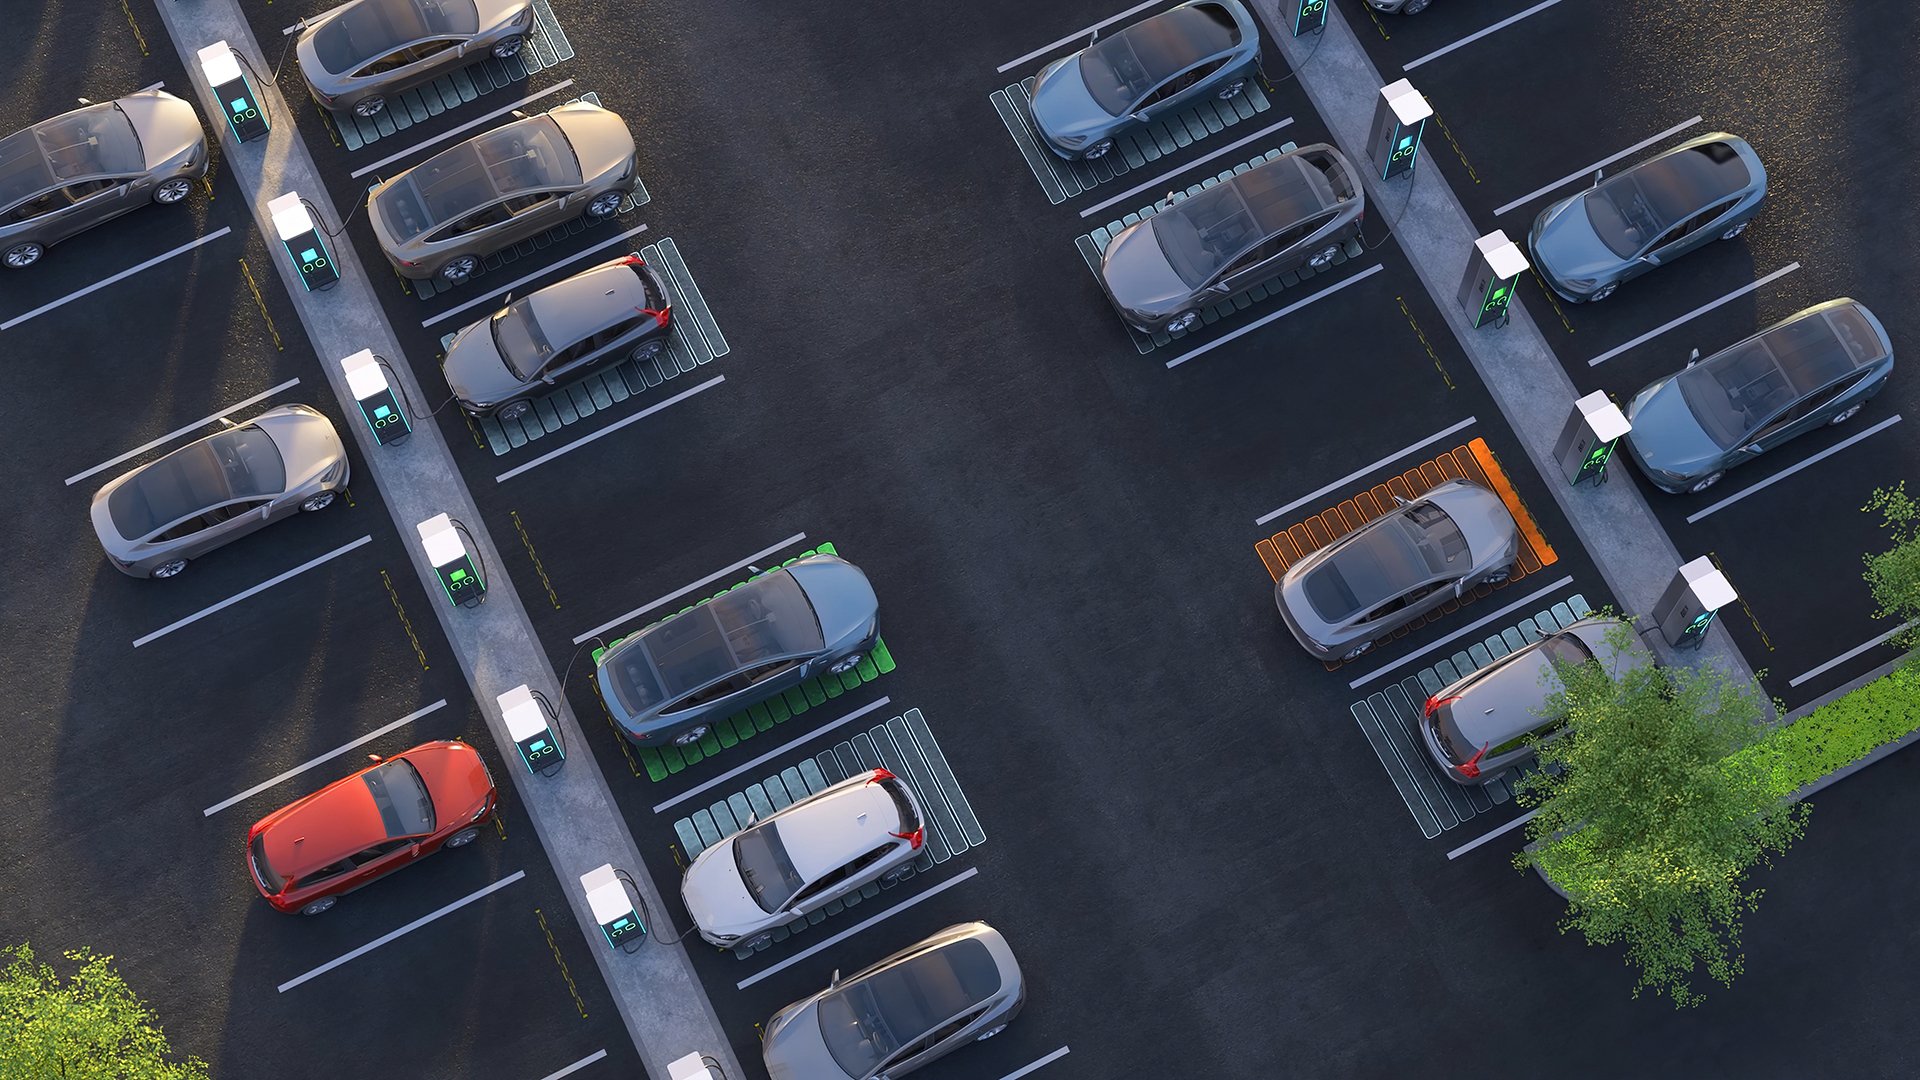 An aerial shot of multiple cars charging on a parking lot, the visual is edited to represent the status of a charge, green is full, gray is charging, orange is nearly empty.